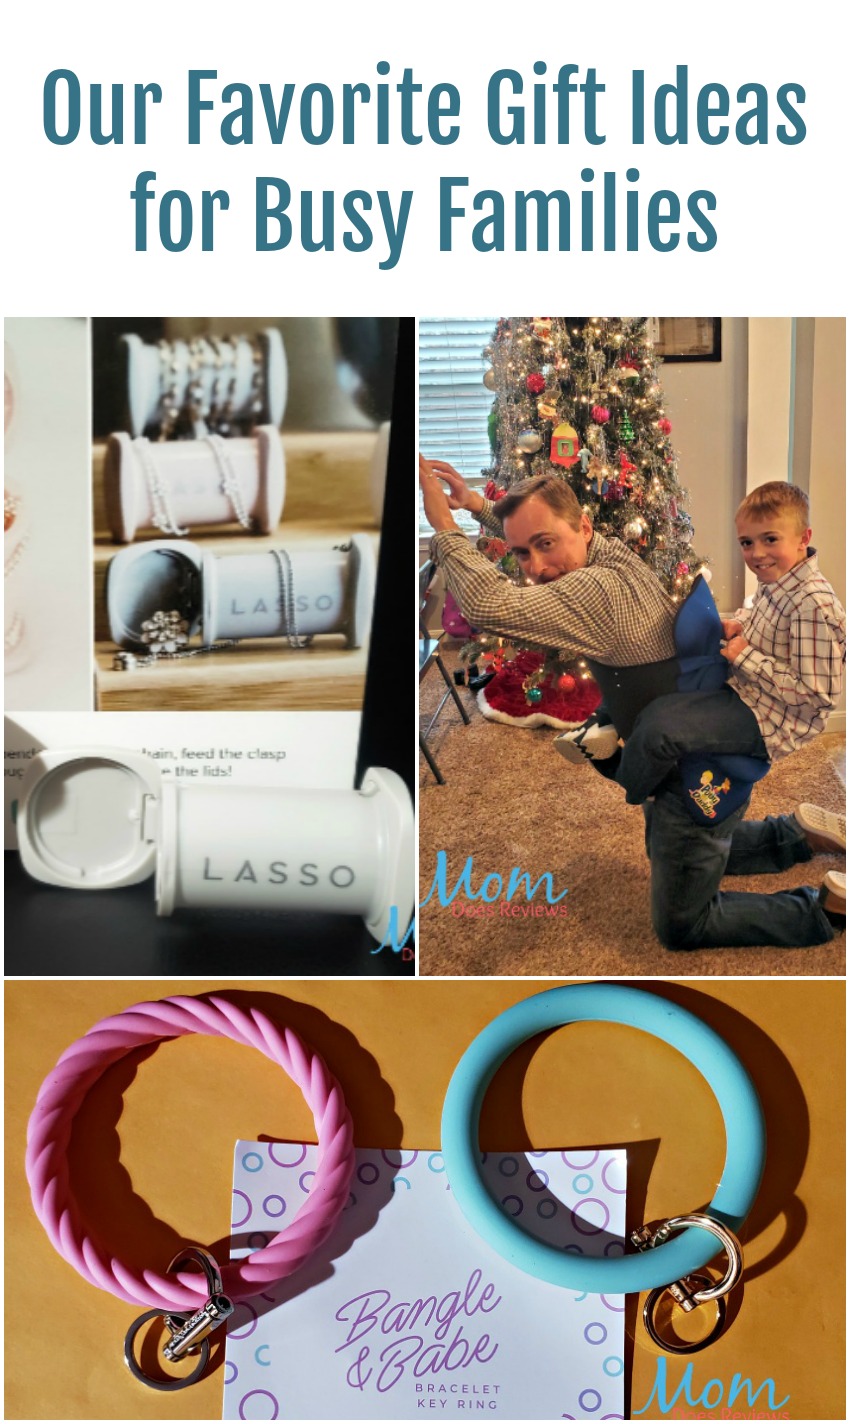 Our Favorite Gift Ideas for Busy Families